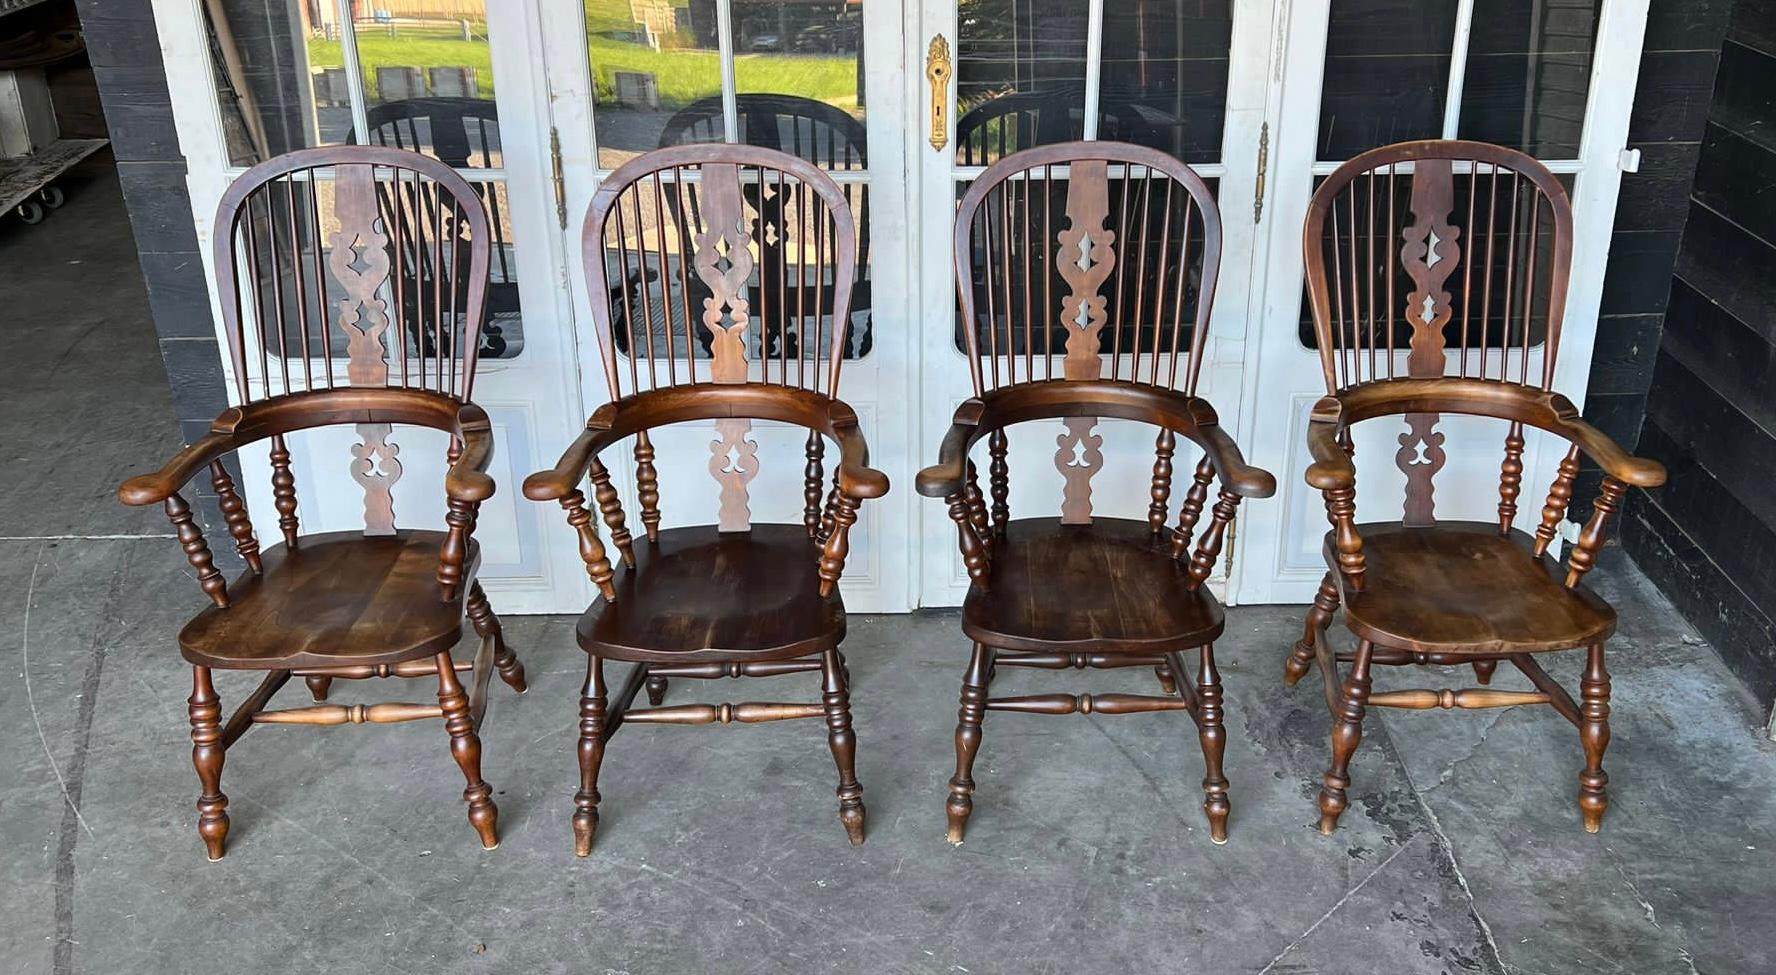 A delightful Harlequin Set of 4 Broad Arm Chairs dating to the early 19th Century. Made from a variety of woods as these chairs are including Ash and Elm. They are strong and sturdy and in excellent original condition. These chairs are becoming hard